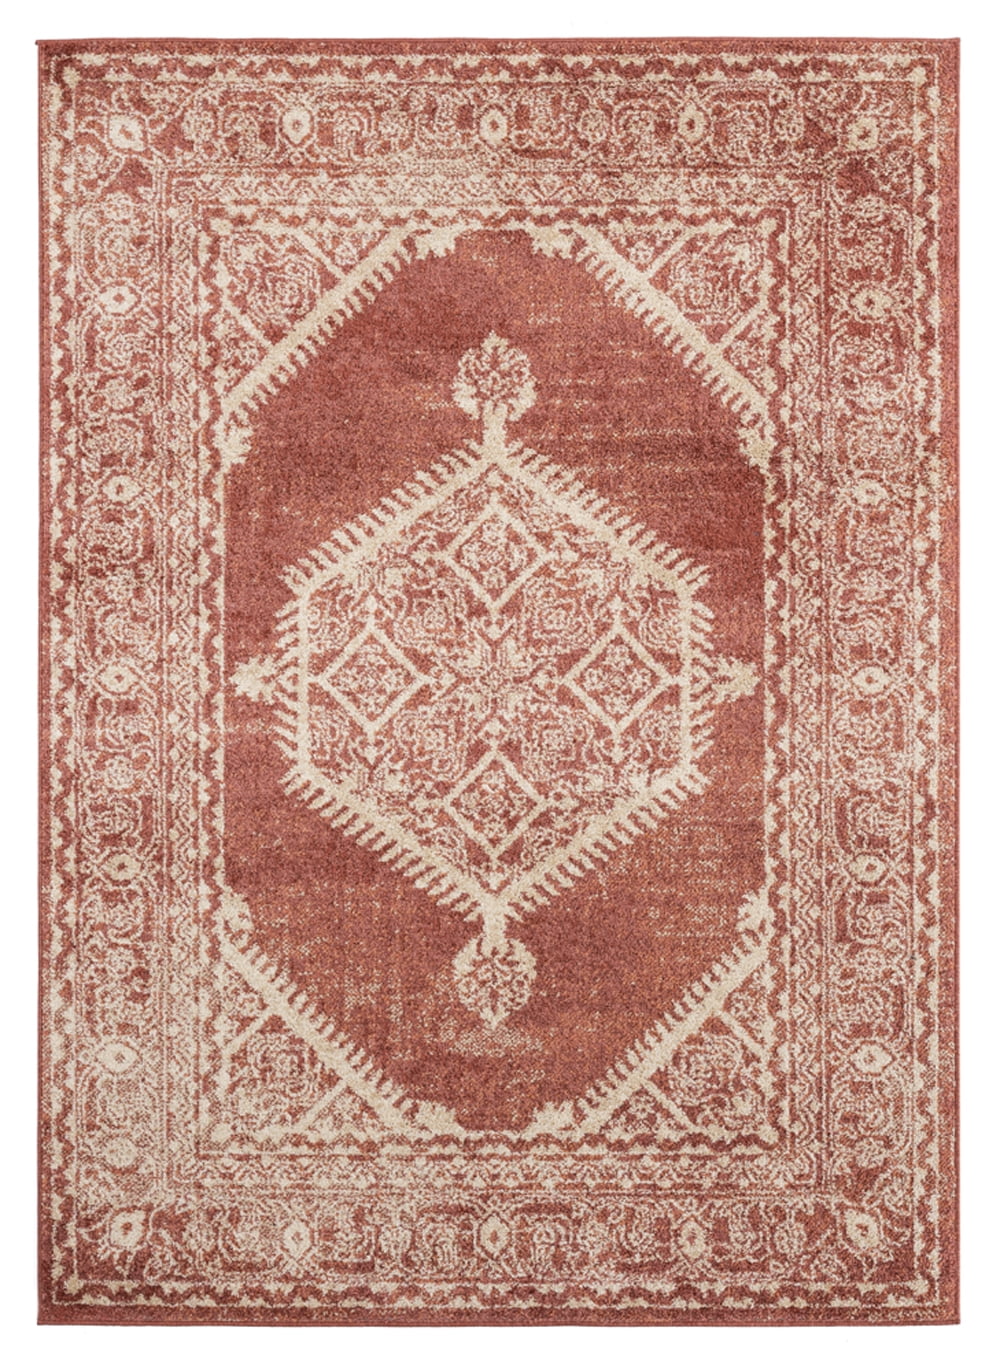 Brown Traditional-European Distressed Scrolls Area Rug Bordered 1830-30317 